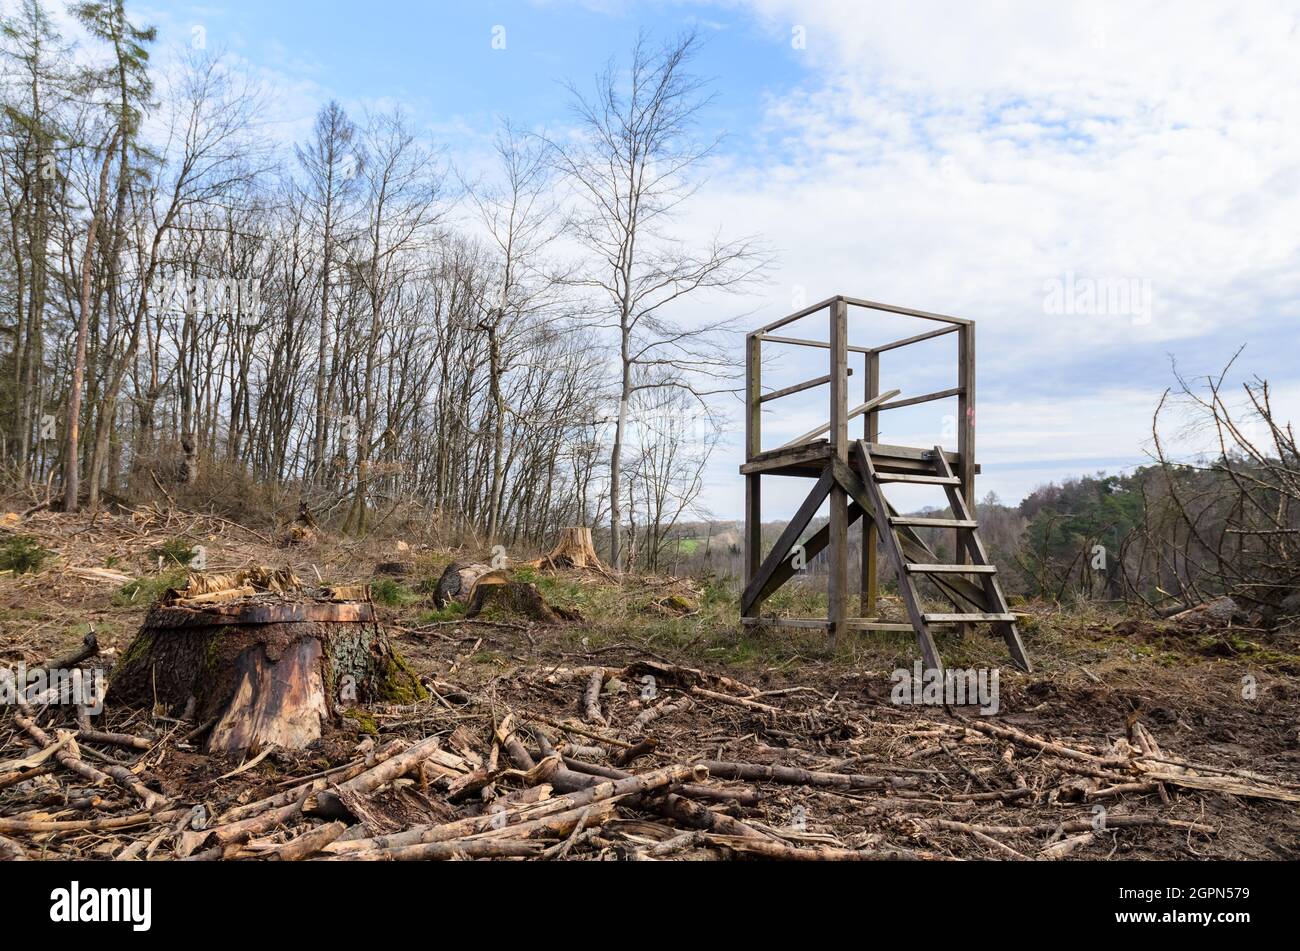 Simple wooden raised hide with ladder for hunting and observation of wildlife near a forest in Westerwald, Rheinland-Palatinate, Germany, Europe Stock Photo